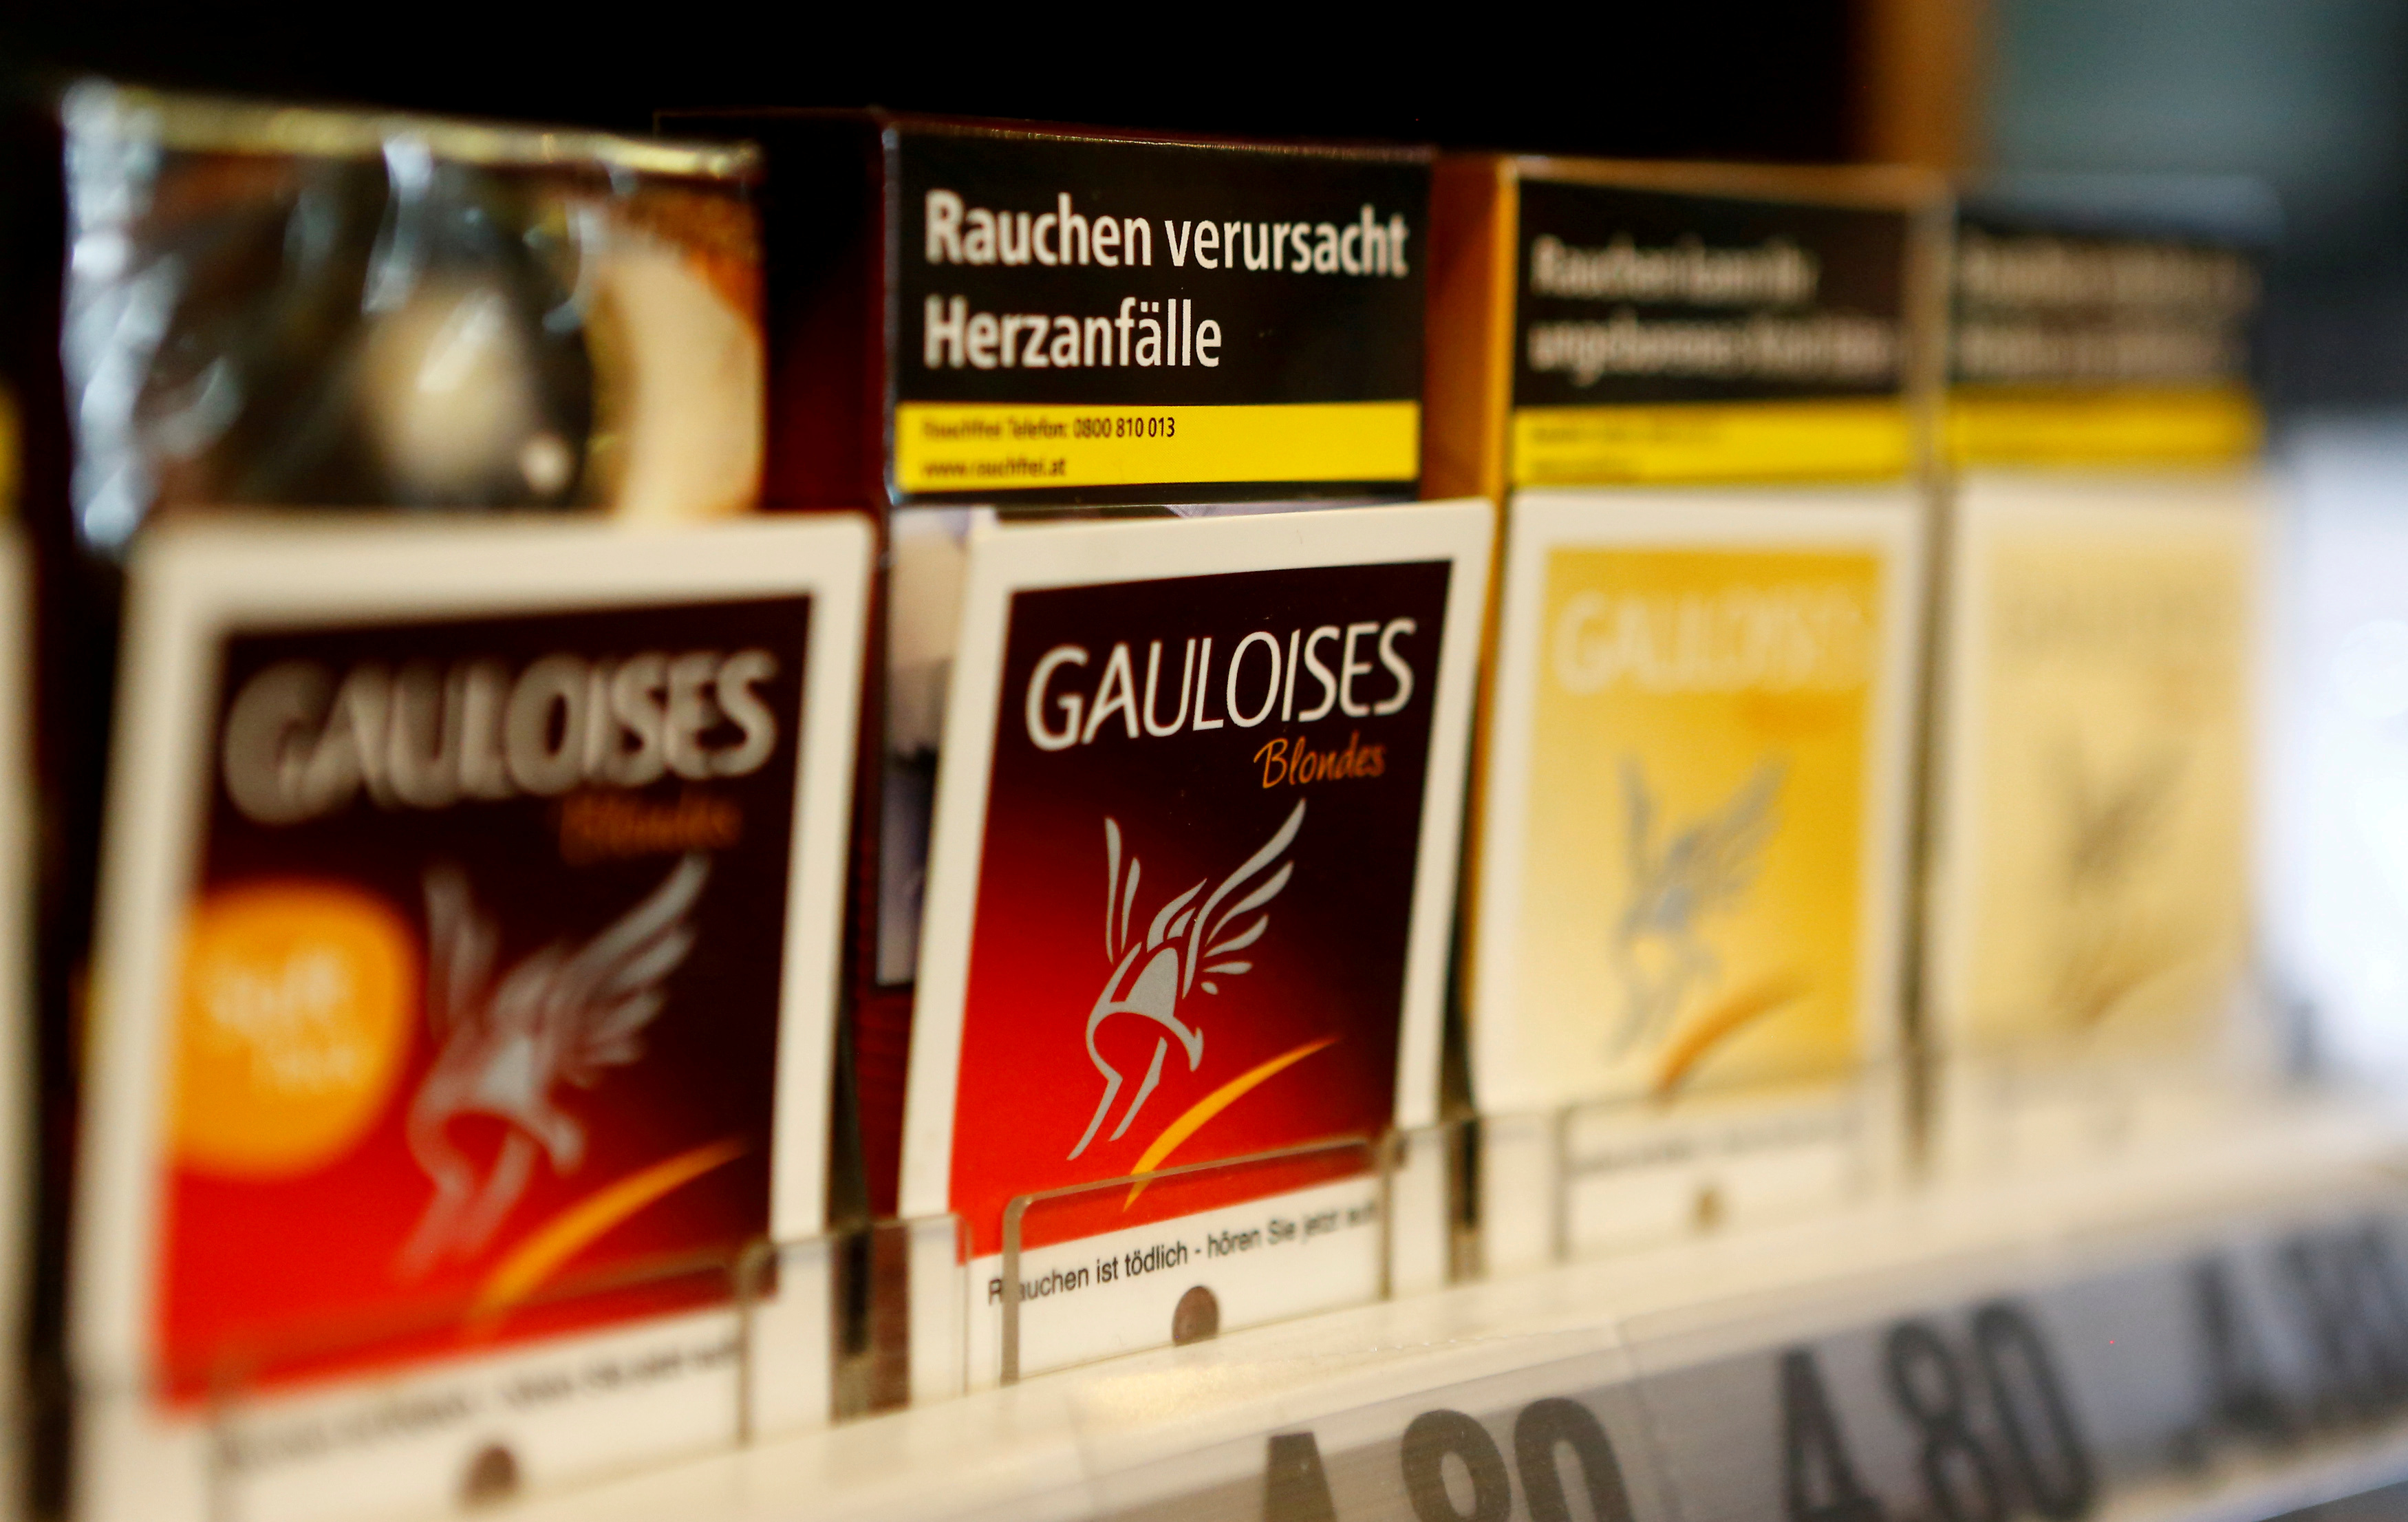 Packs of Gauloises cigarettes are on display in a tobacco shop in Vienna, Austria, May 12, 2017.  REUTERS/Leonhard Foeger